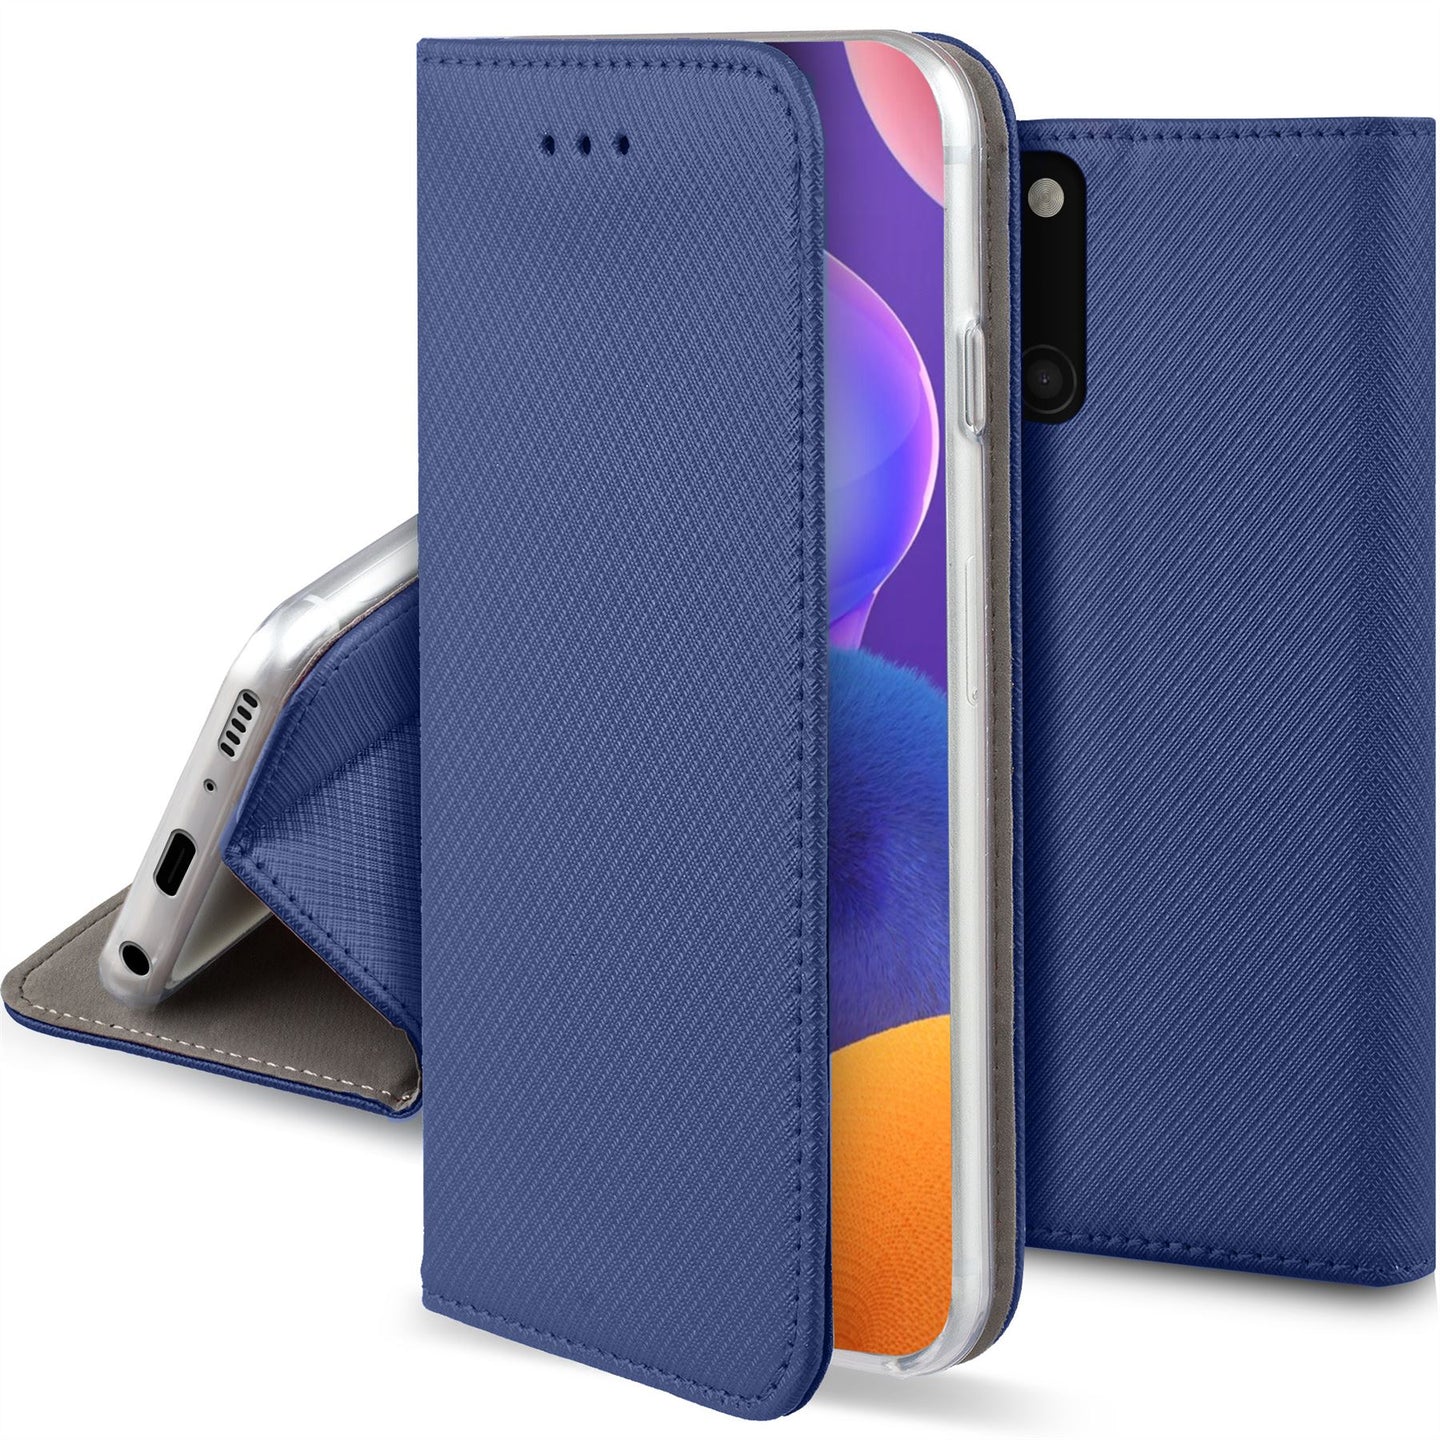 Moozy Case Flip Cover for Samsung A31, Dark Blue - Smart Magnetic Flip Case with Card Holder and Stand